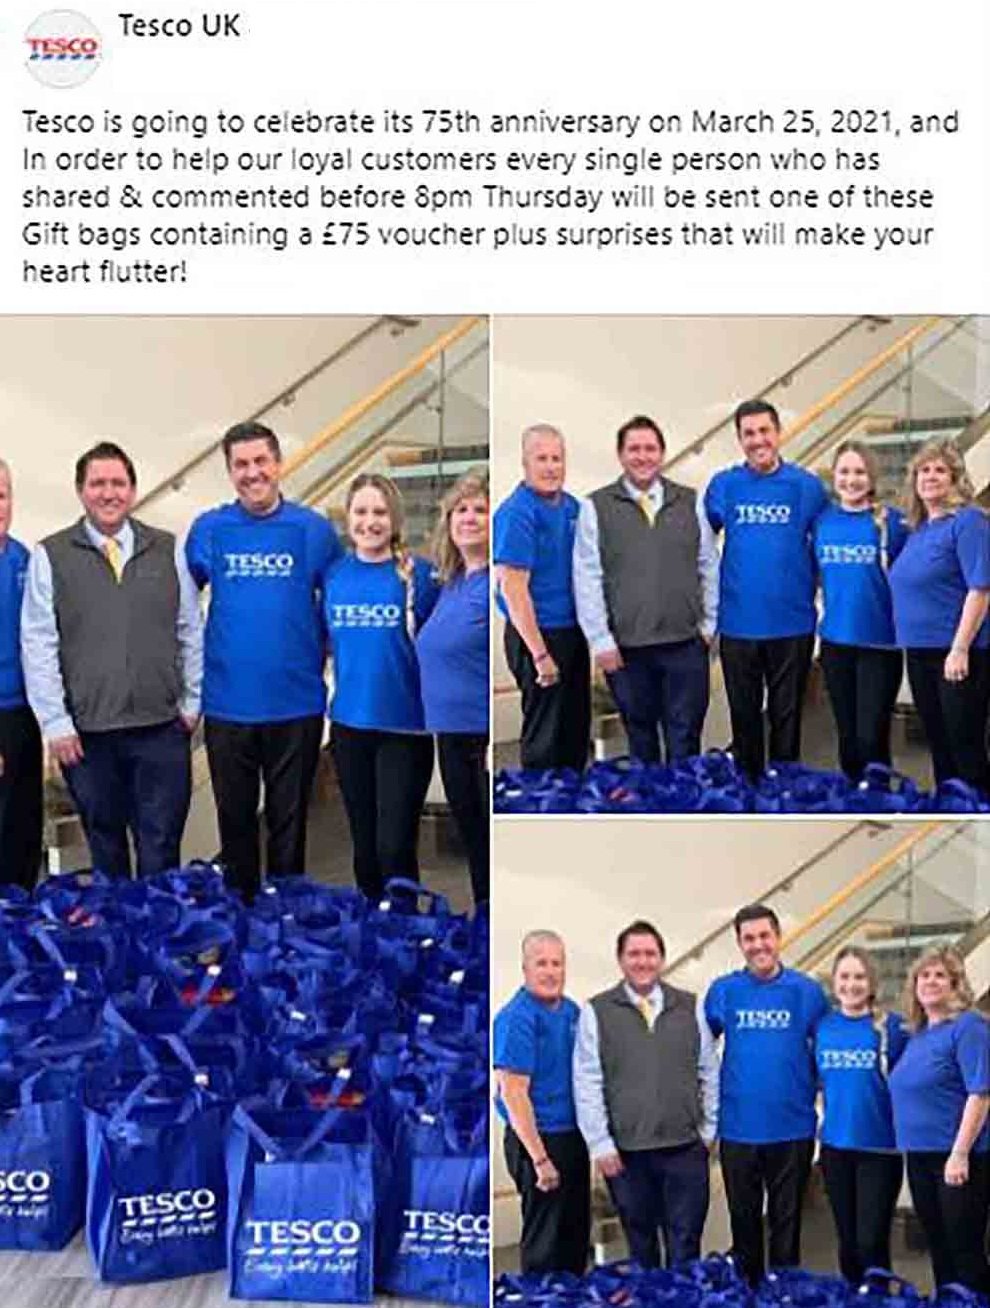 Tesco Facebook Scam - Free Grocery Box for Everyone